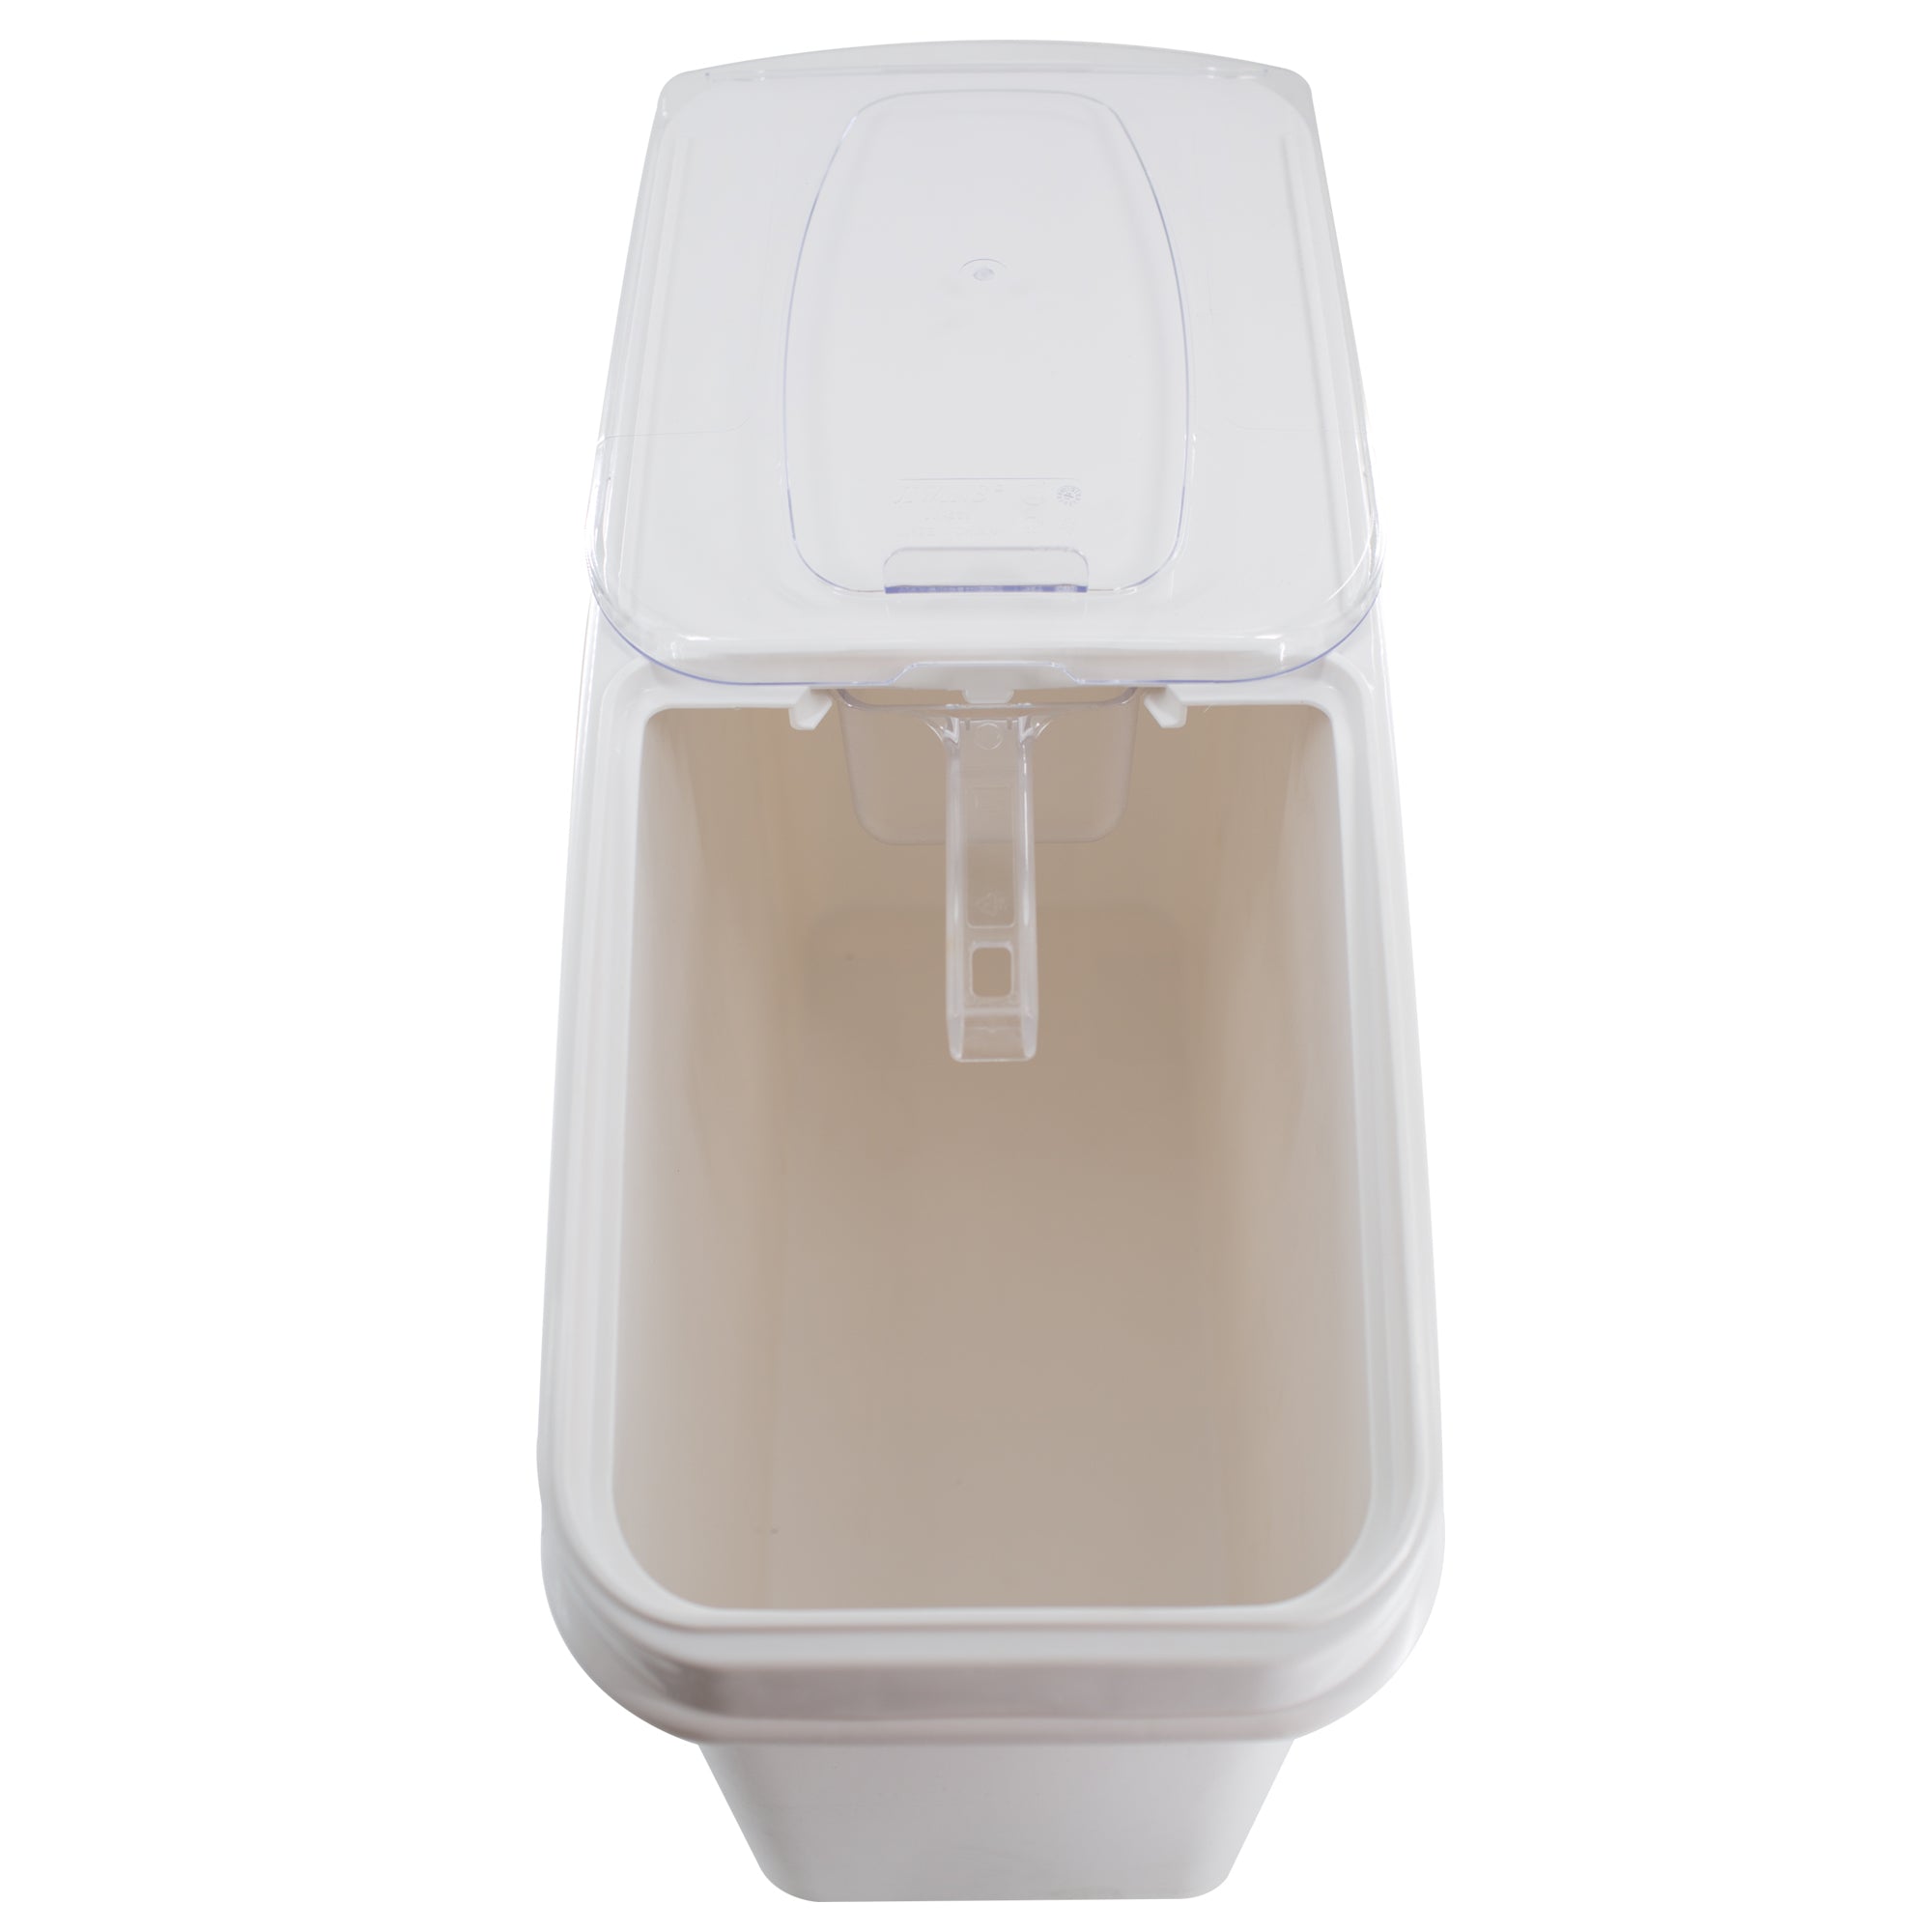 21 Gallon / 335 Cup White Slant Top Mobile Ingredient Storage Bin with Sliding Lid & Scoop